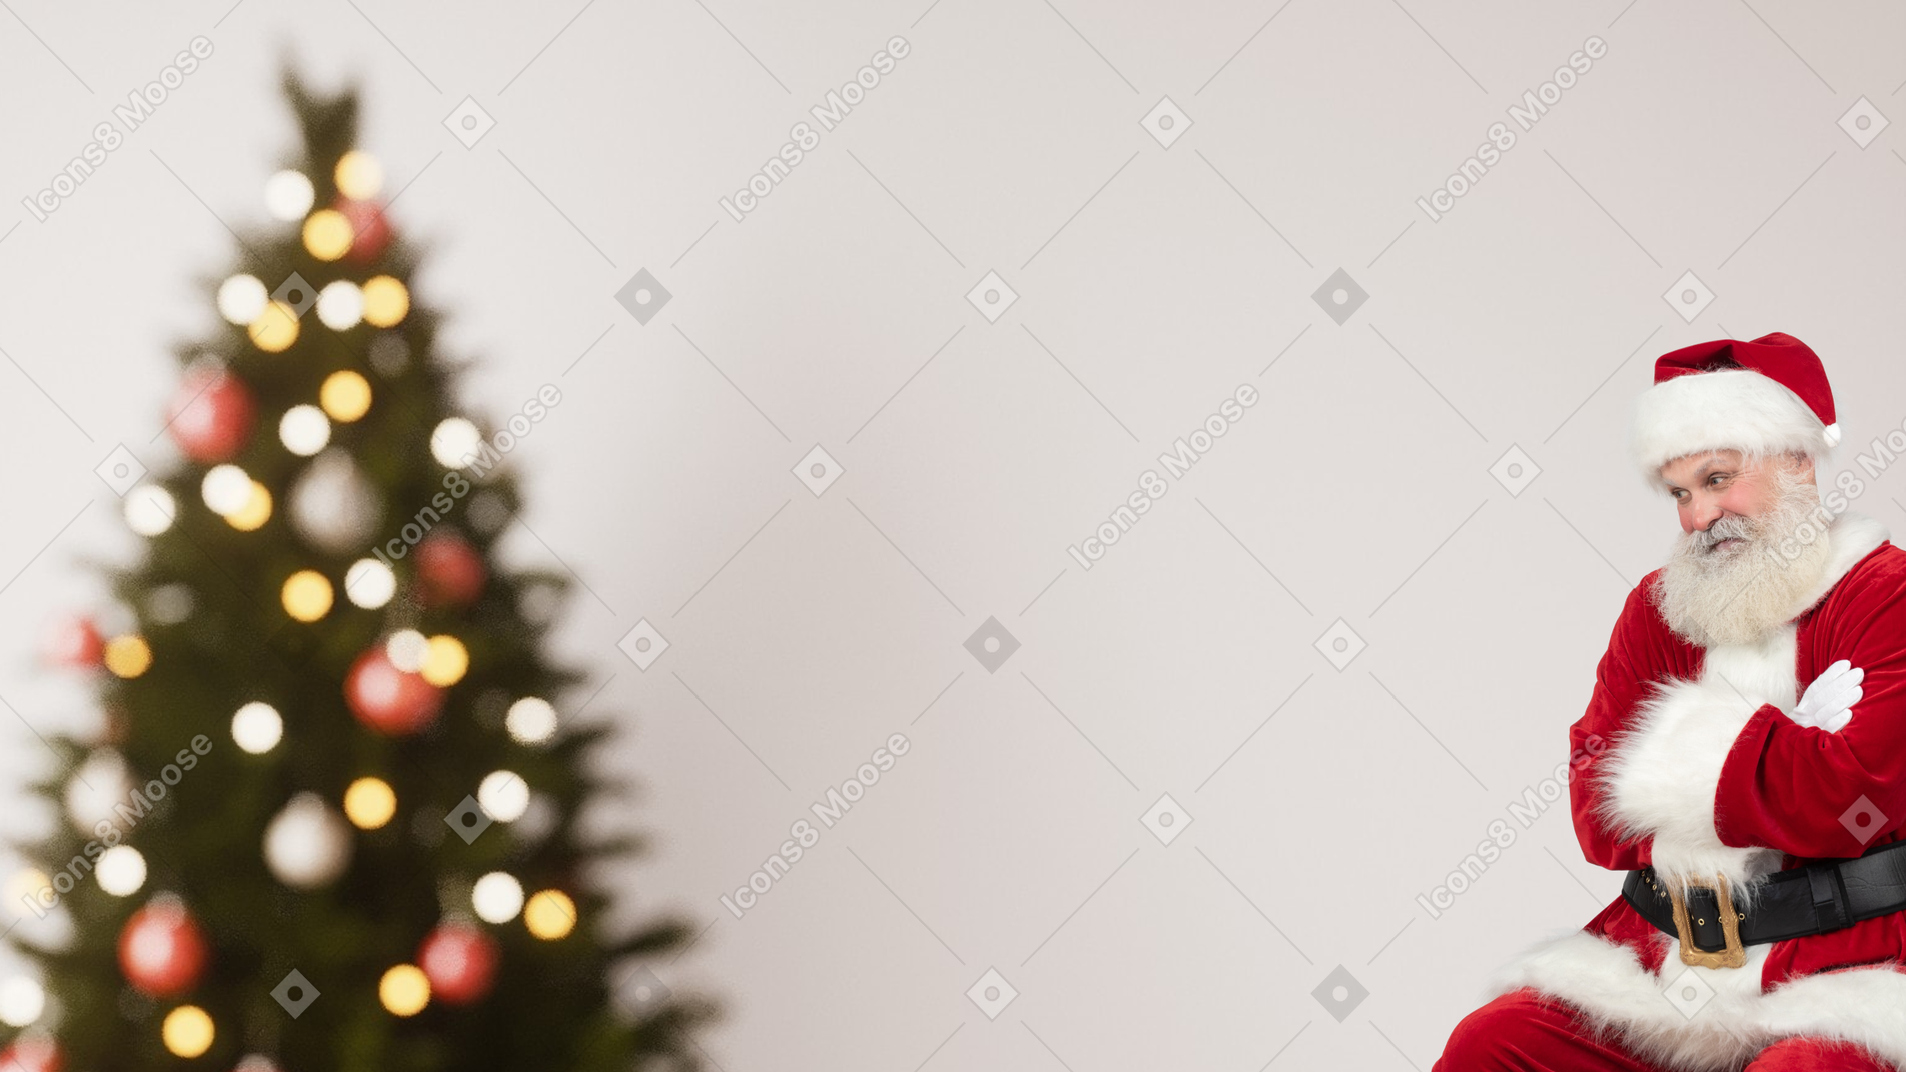 A man dressed as santa claus sitting in front of a christmas tree